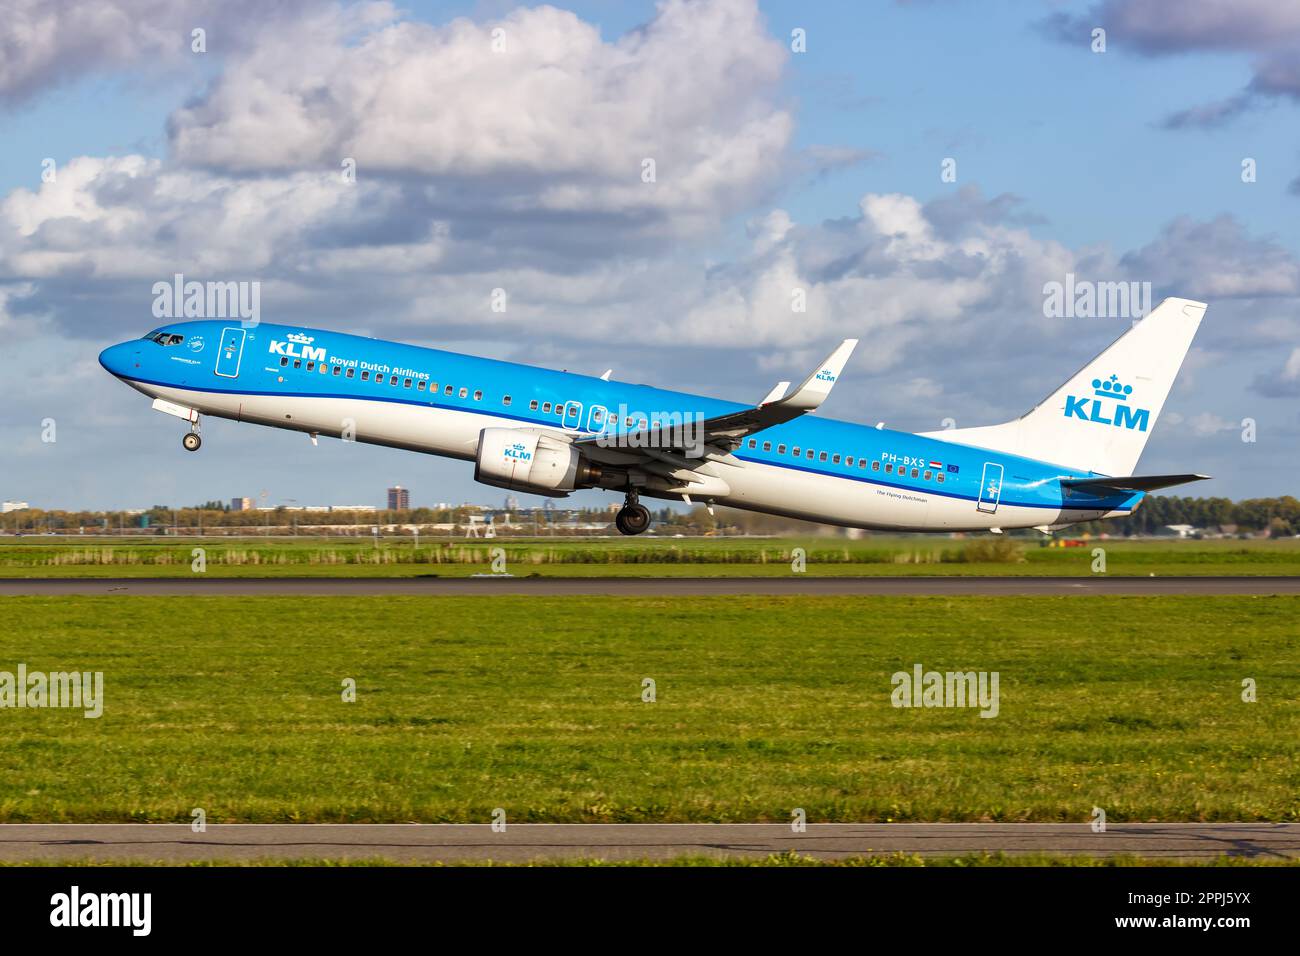 KLM Boeing 737-900 airplane at Amsterdam Schiphol airport in the Netherlands Stock Photo